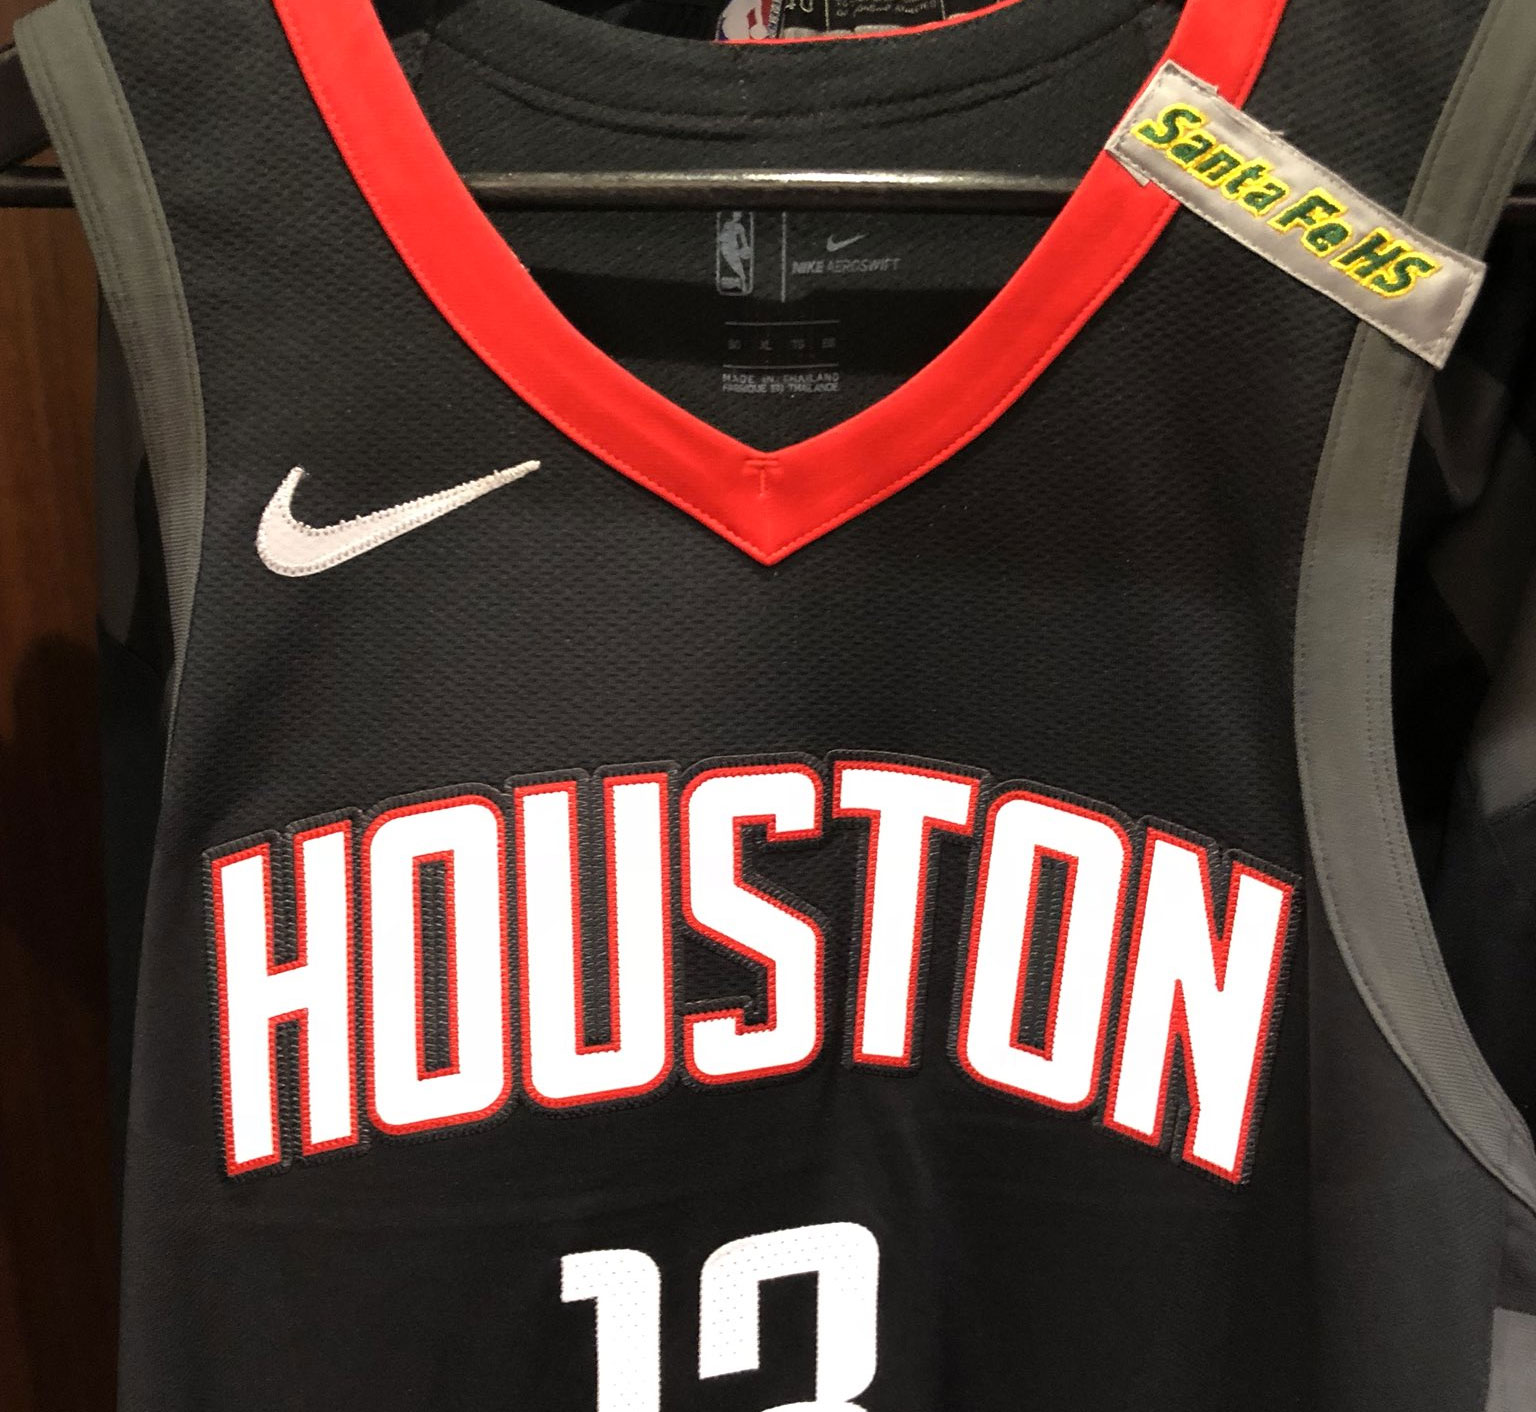 Rockets Wear Patch for Santa Fe Shooting Victims